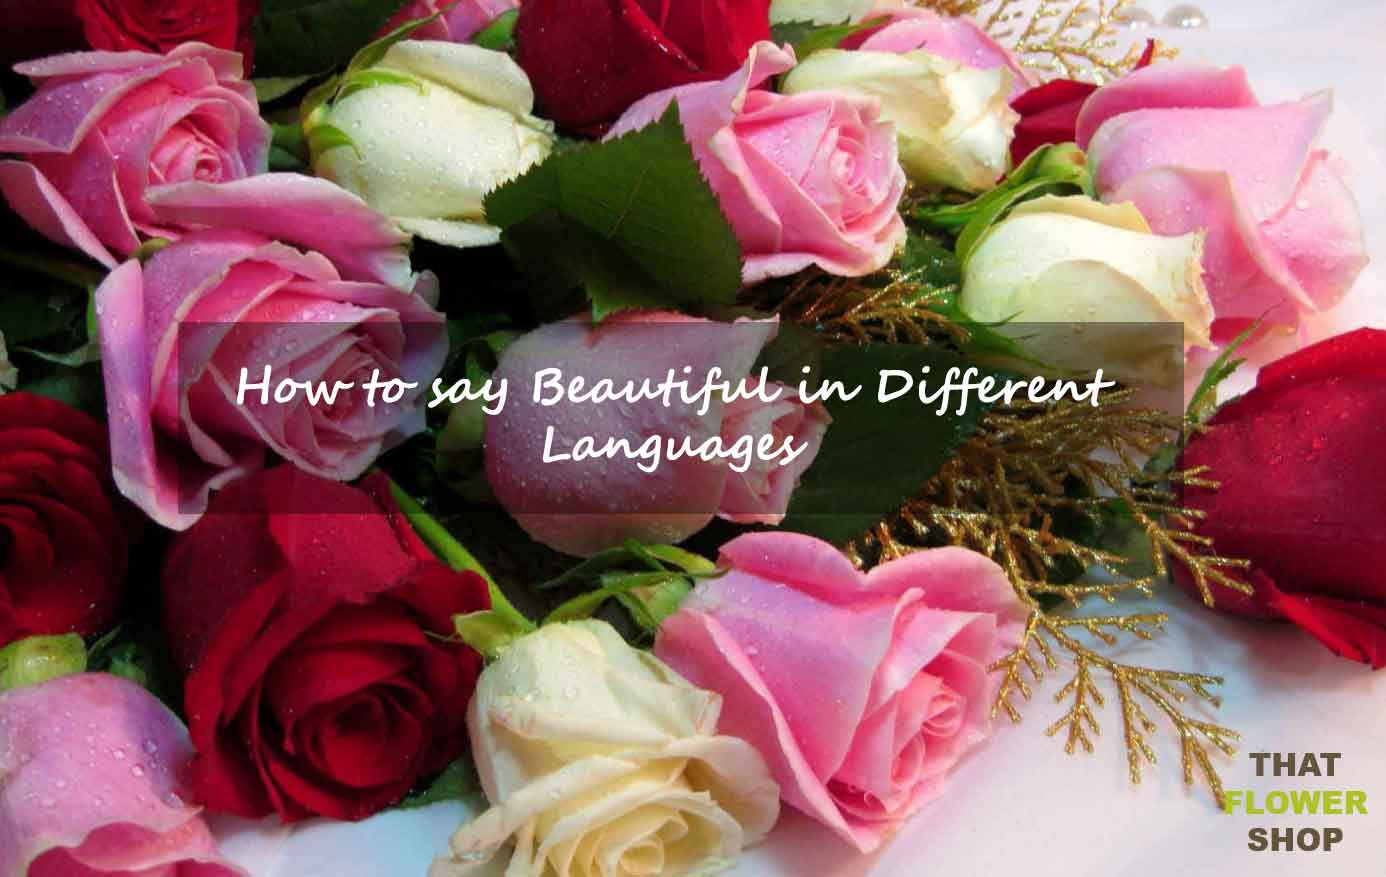 How to say Beautiful in Different Languages